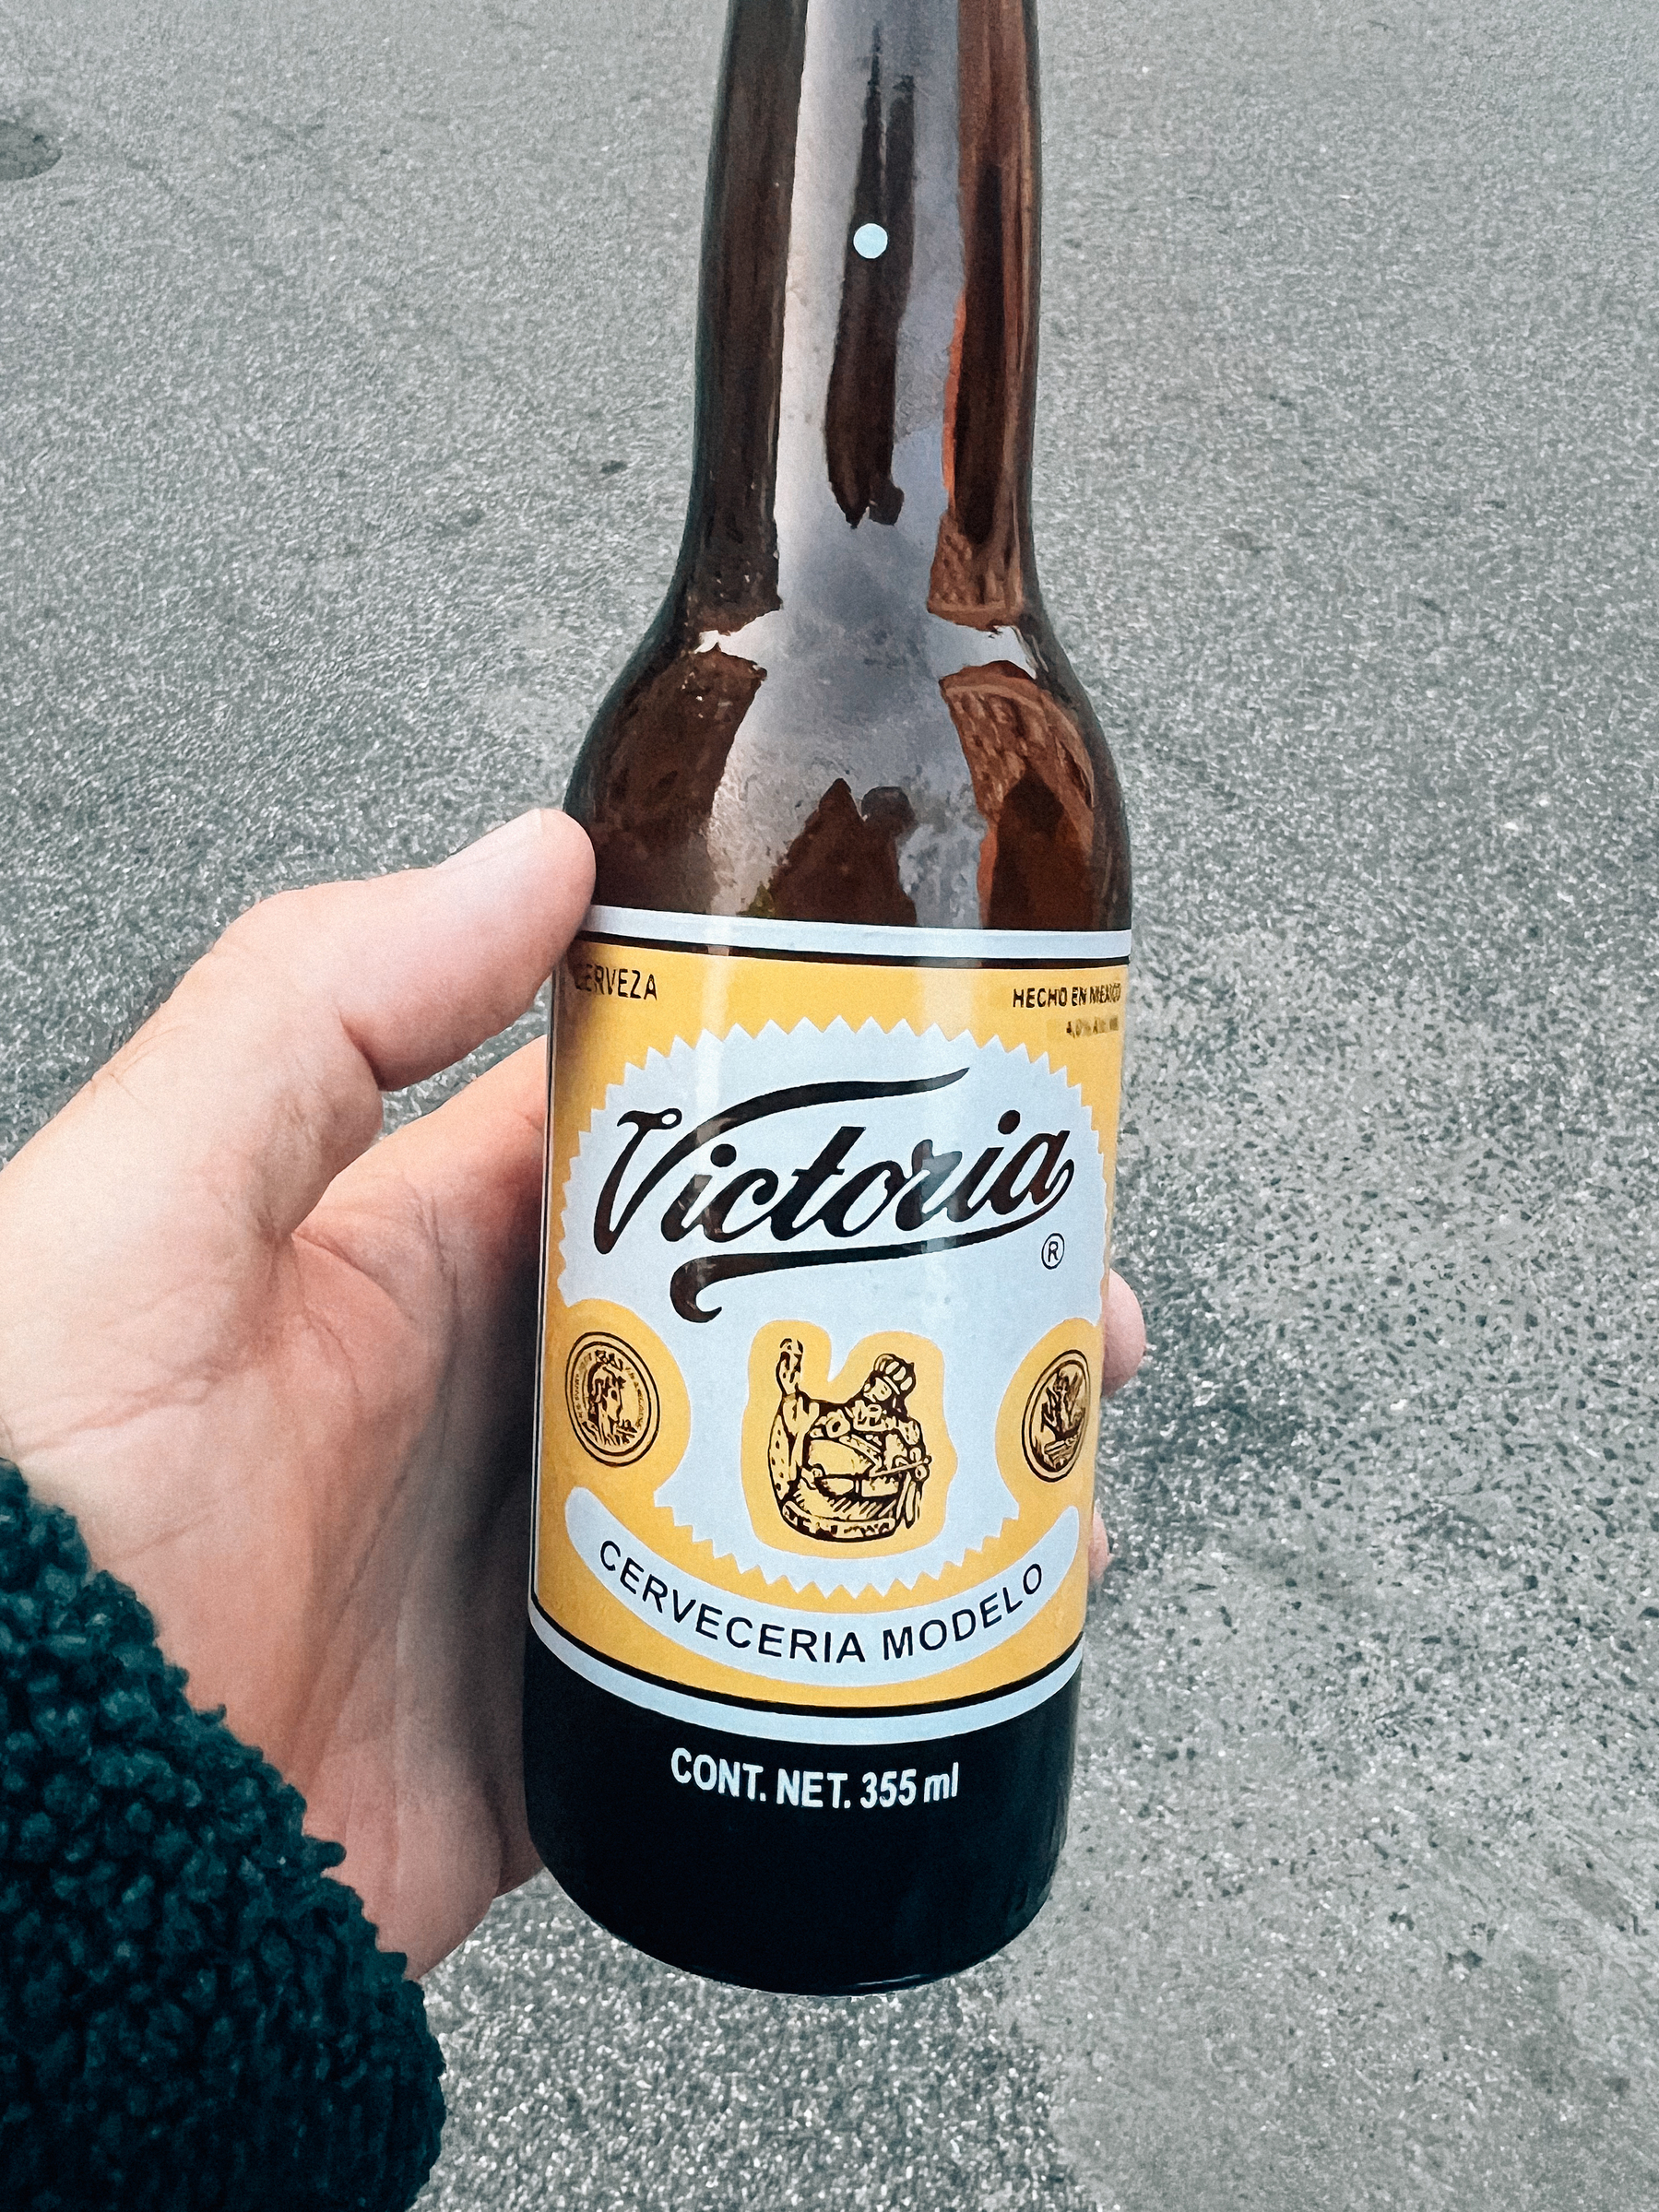 A hand holding a bottle of Victoria beer with a label indicating it is a product of Cervecería Modelo in Mexico, 355 ml.